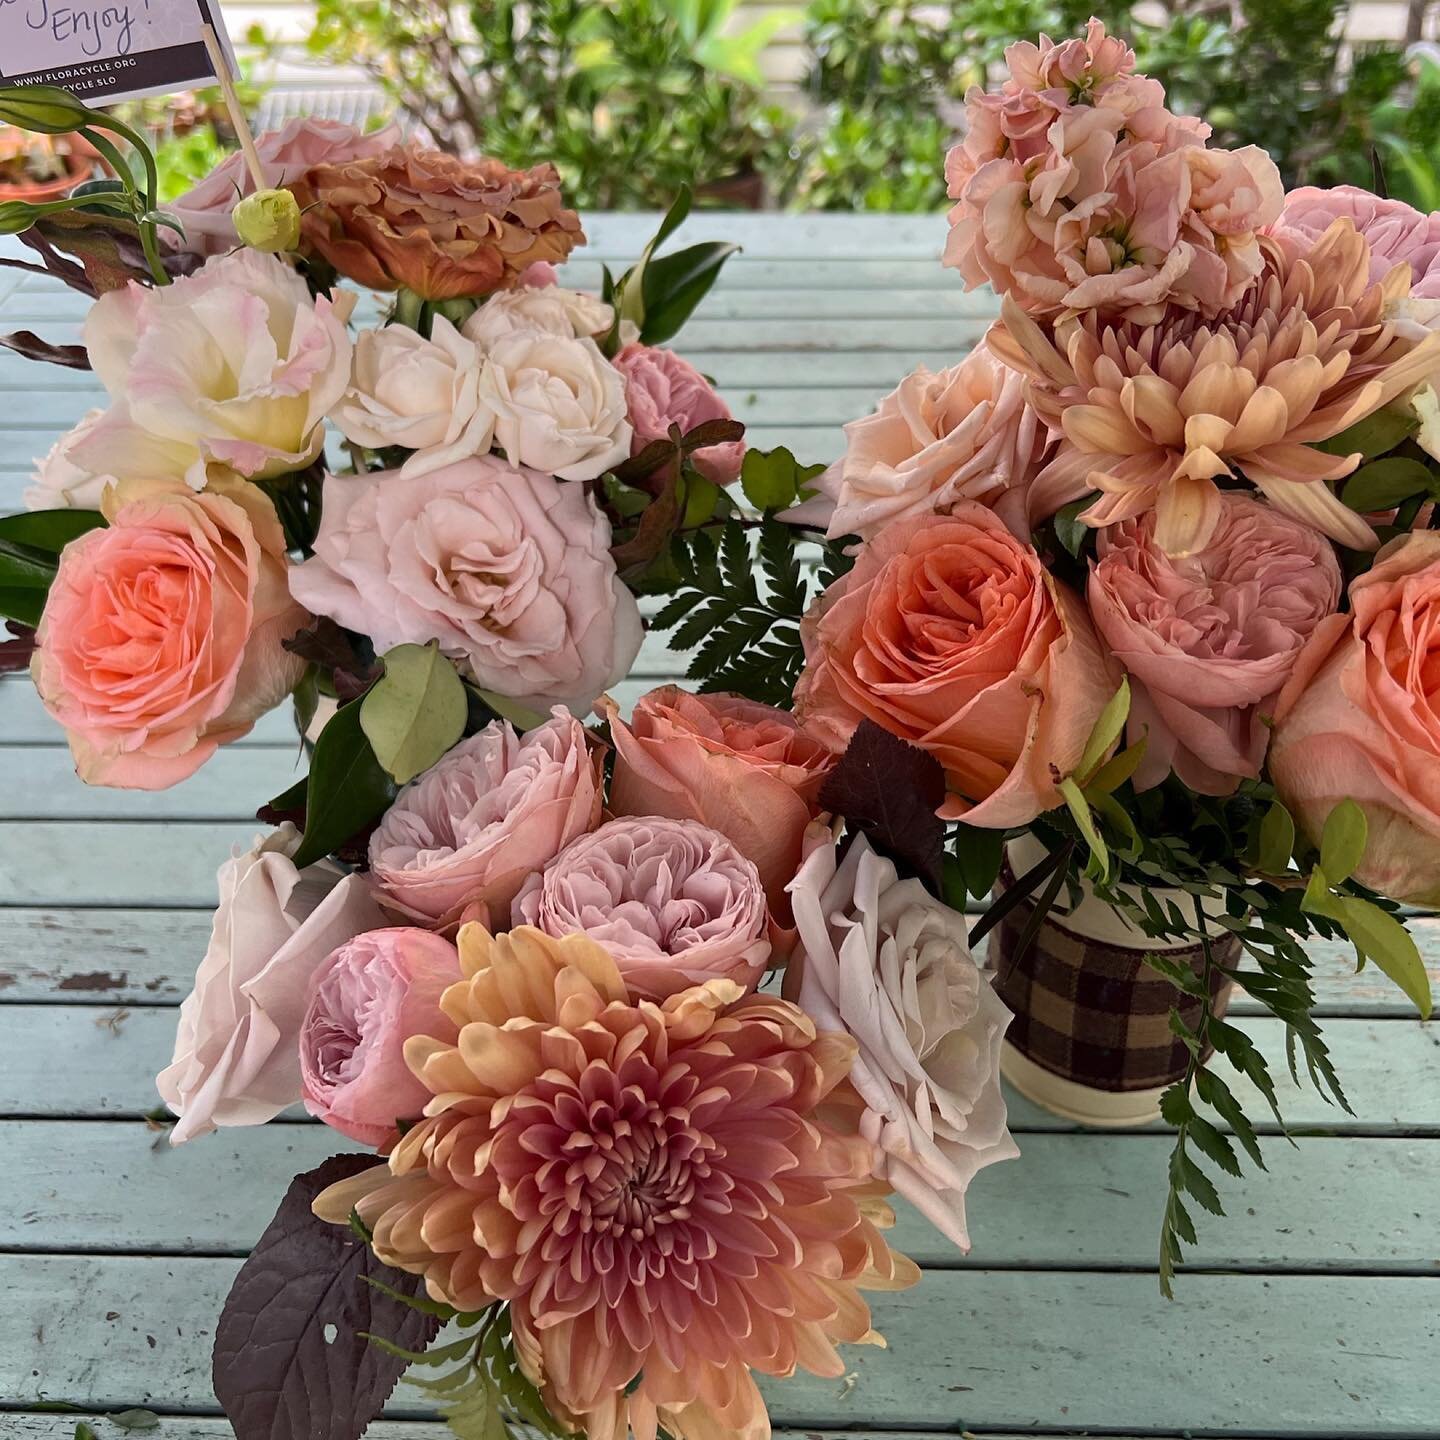 This lush collection was repurposed and delivered to our local post acute care and skilled nursing facilities !🍁We loved transforming these elegant and colorful florals into 70 arrangements for patients to enjoy. (And they smell as good as they look